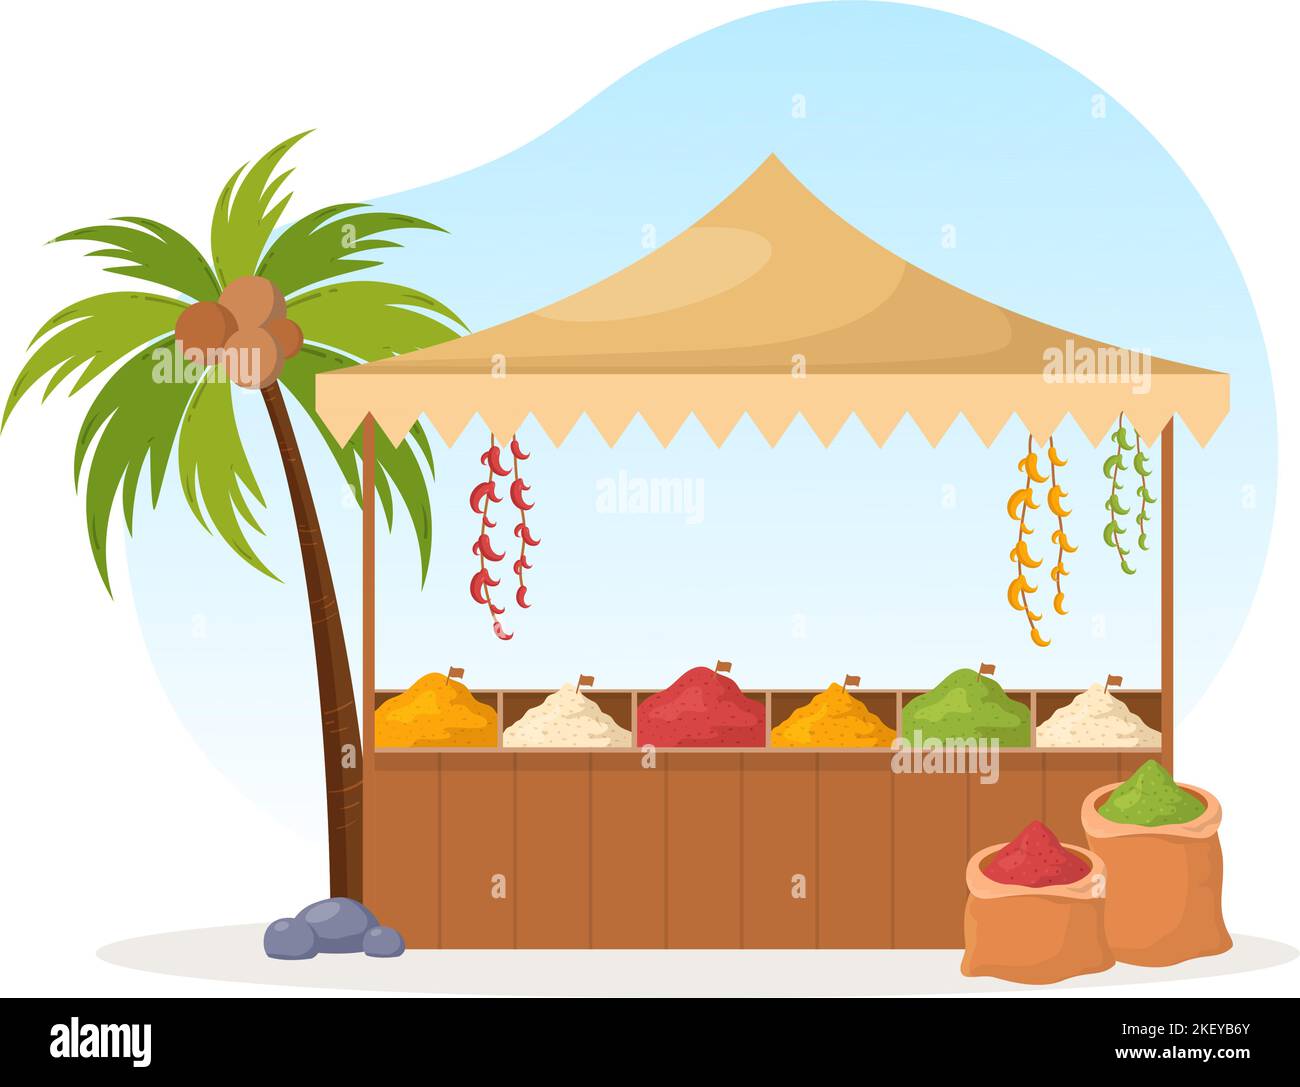 https://c8.alamy.com/comp/2KEYB6Y/spice-shop-with-different-hot-spices-condiment-exotic-fresh-seasoning-and-traditional-herbs-in-flat-cartoon-hand-drawn-templates-illustration-2KEYB6Y.jpg